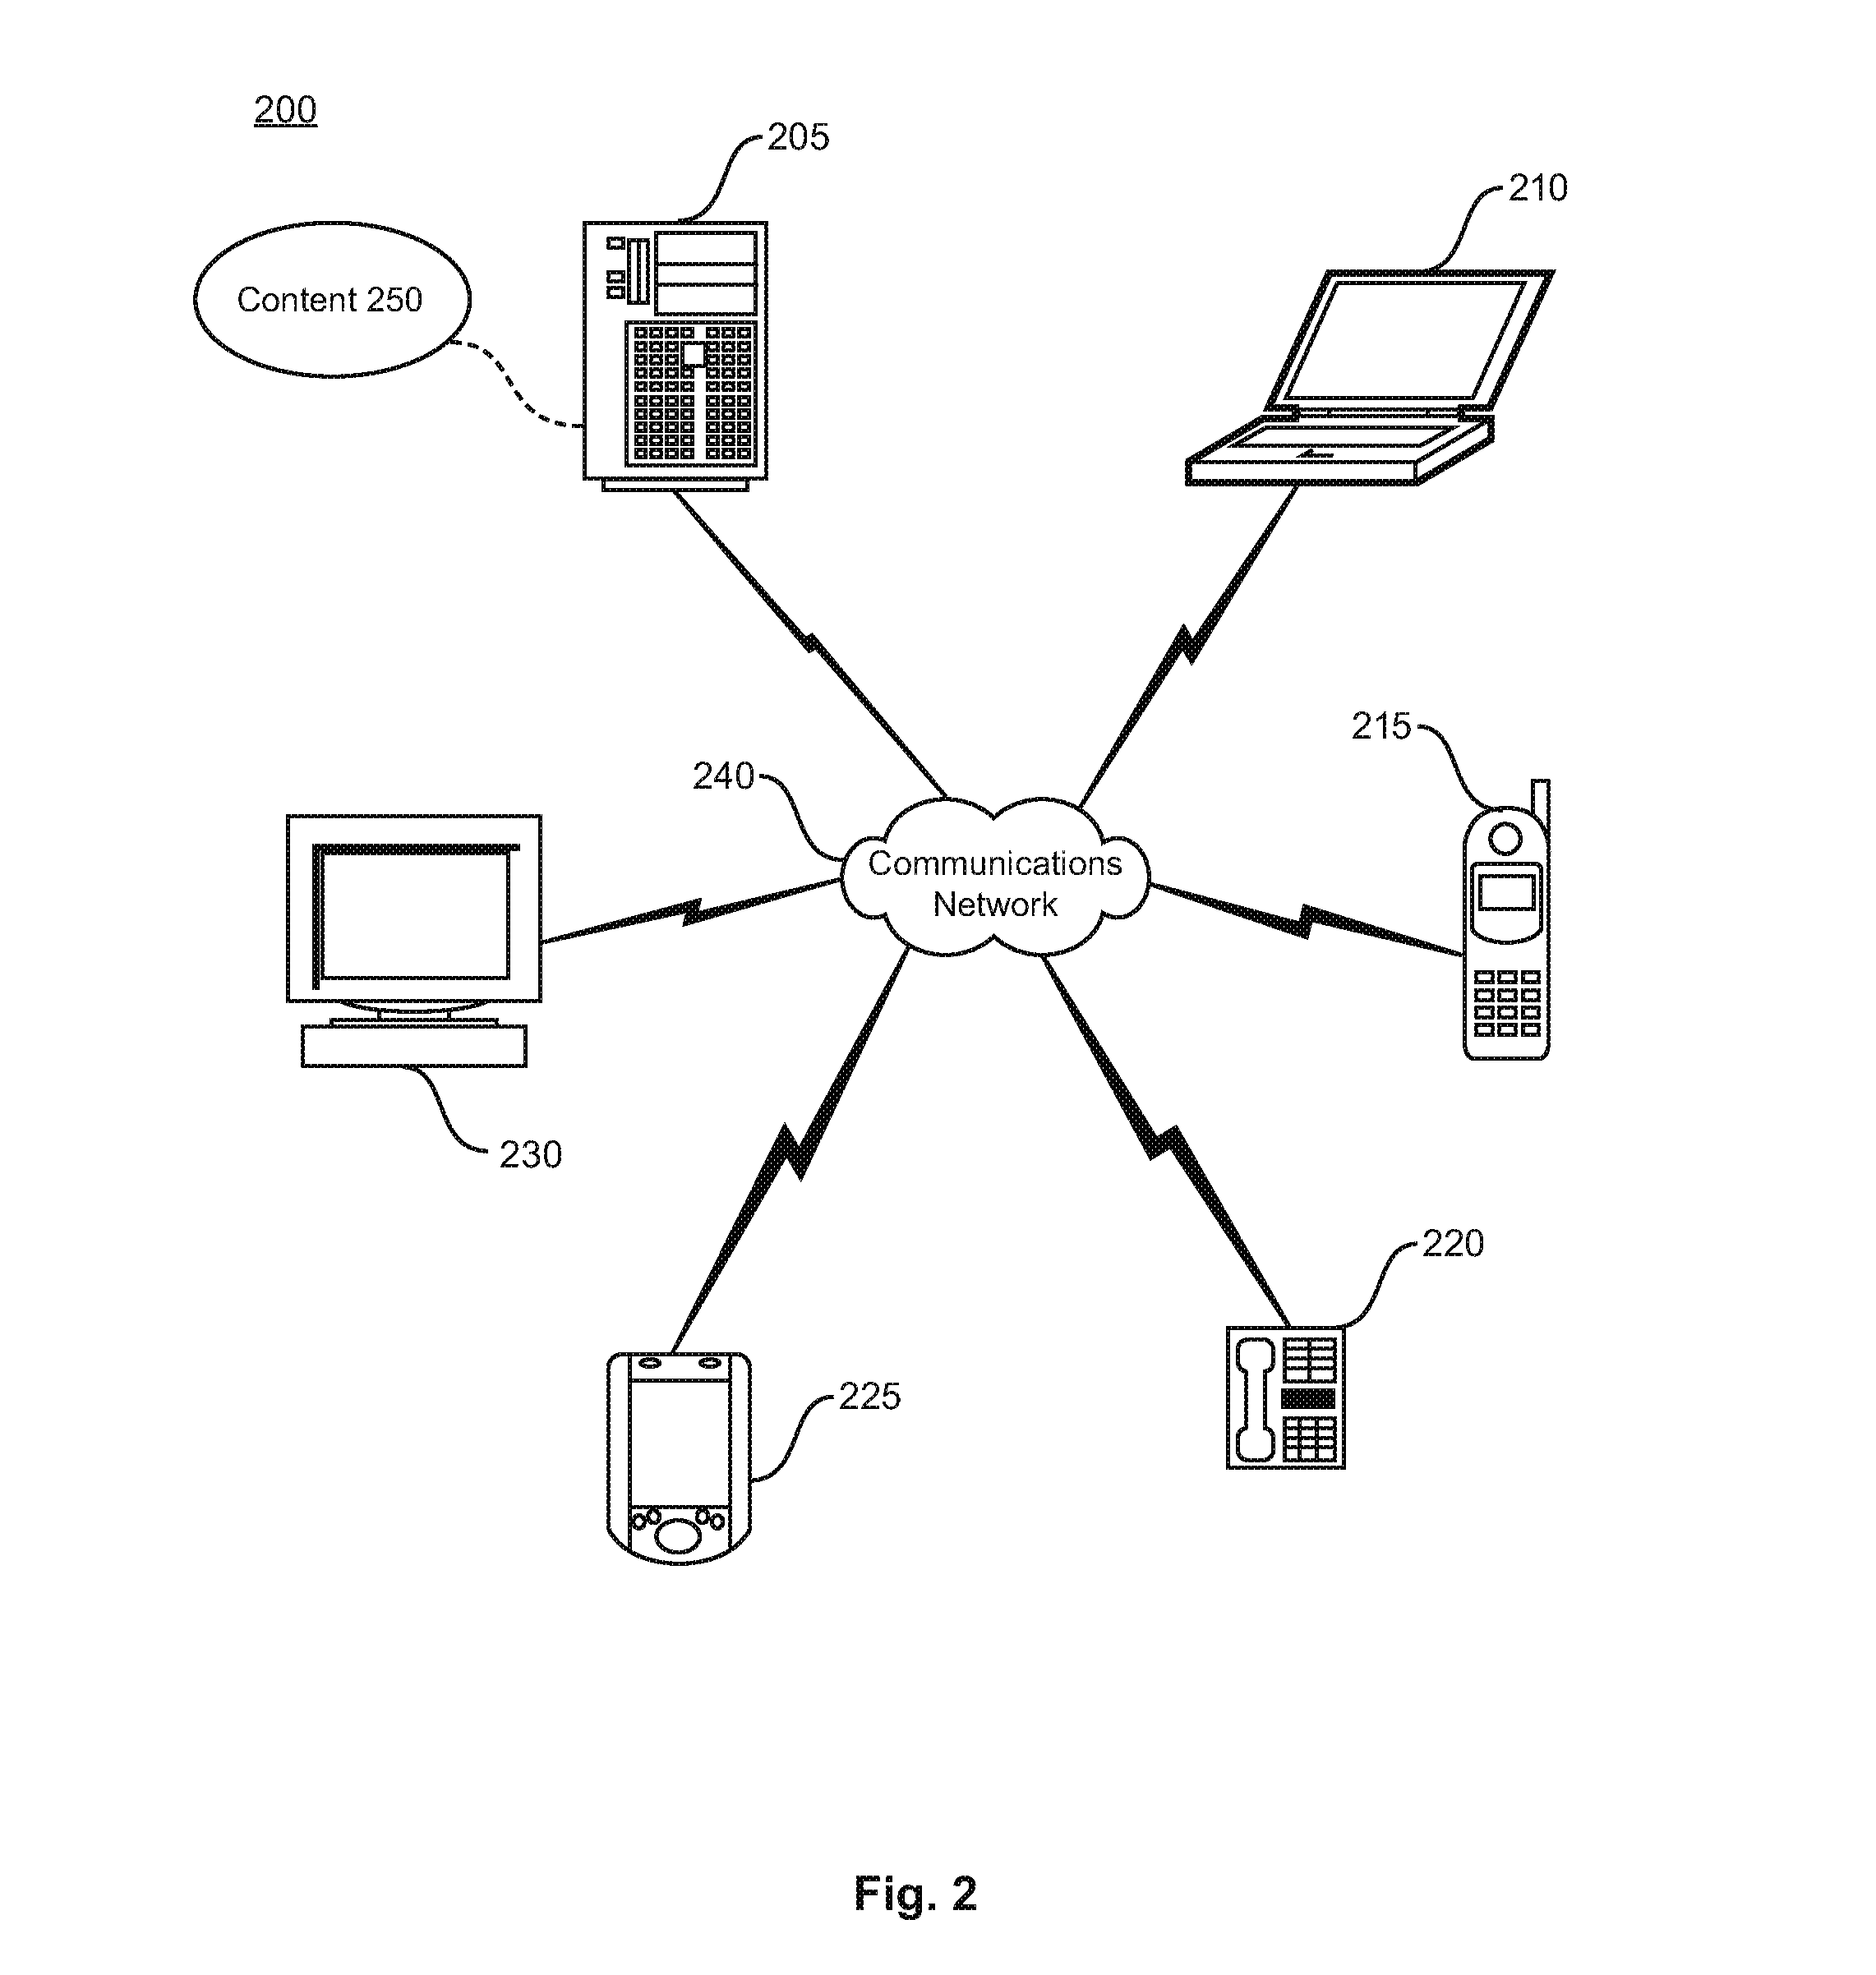 System and method of providing cloud-based business valuation services via a mobile app